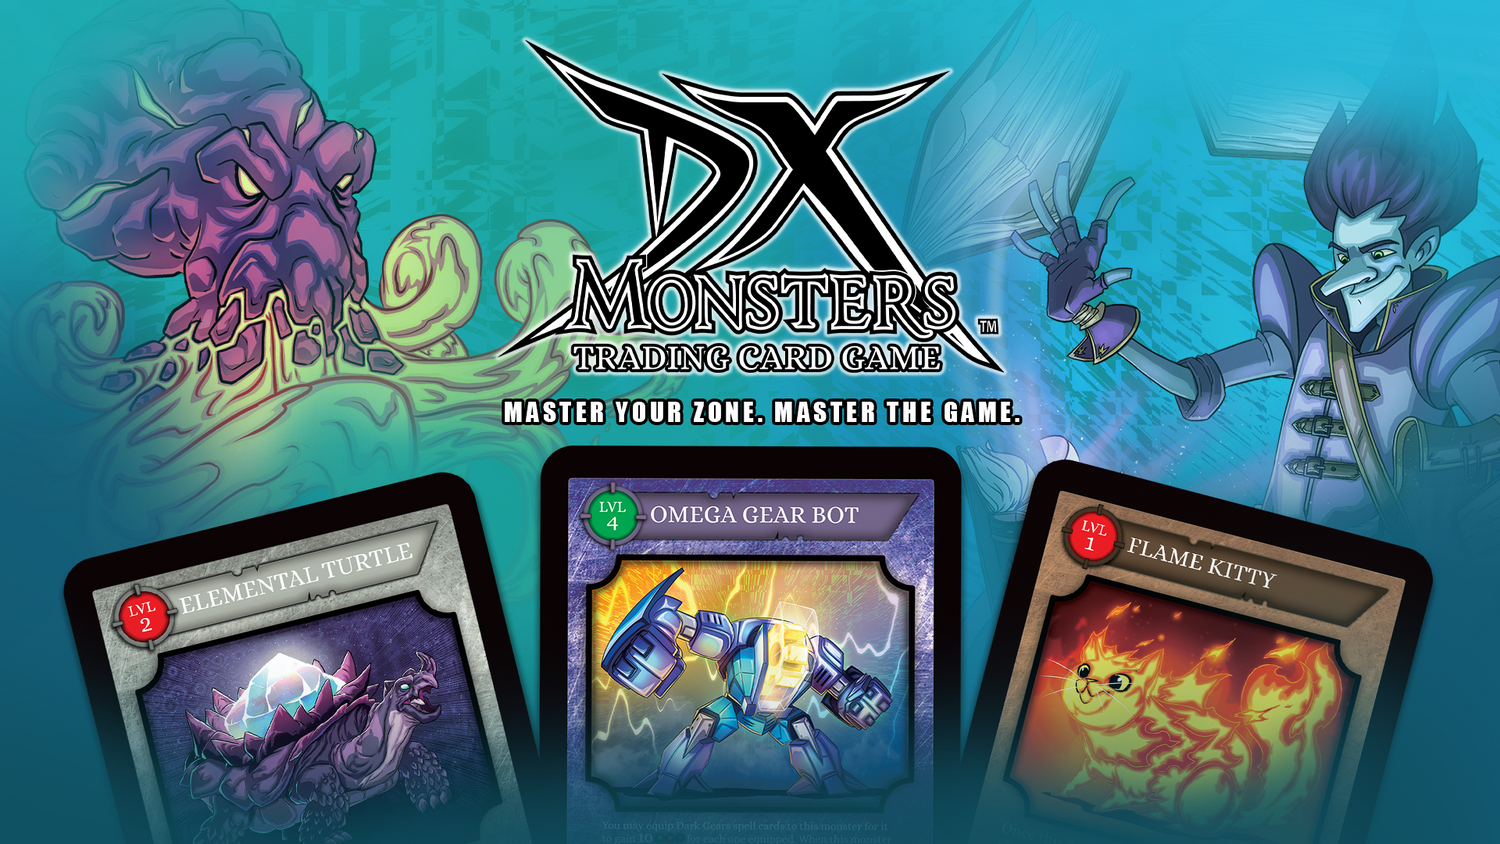 dx monsters trading card game